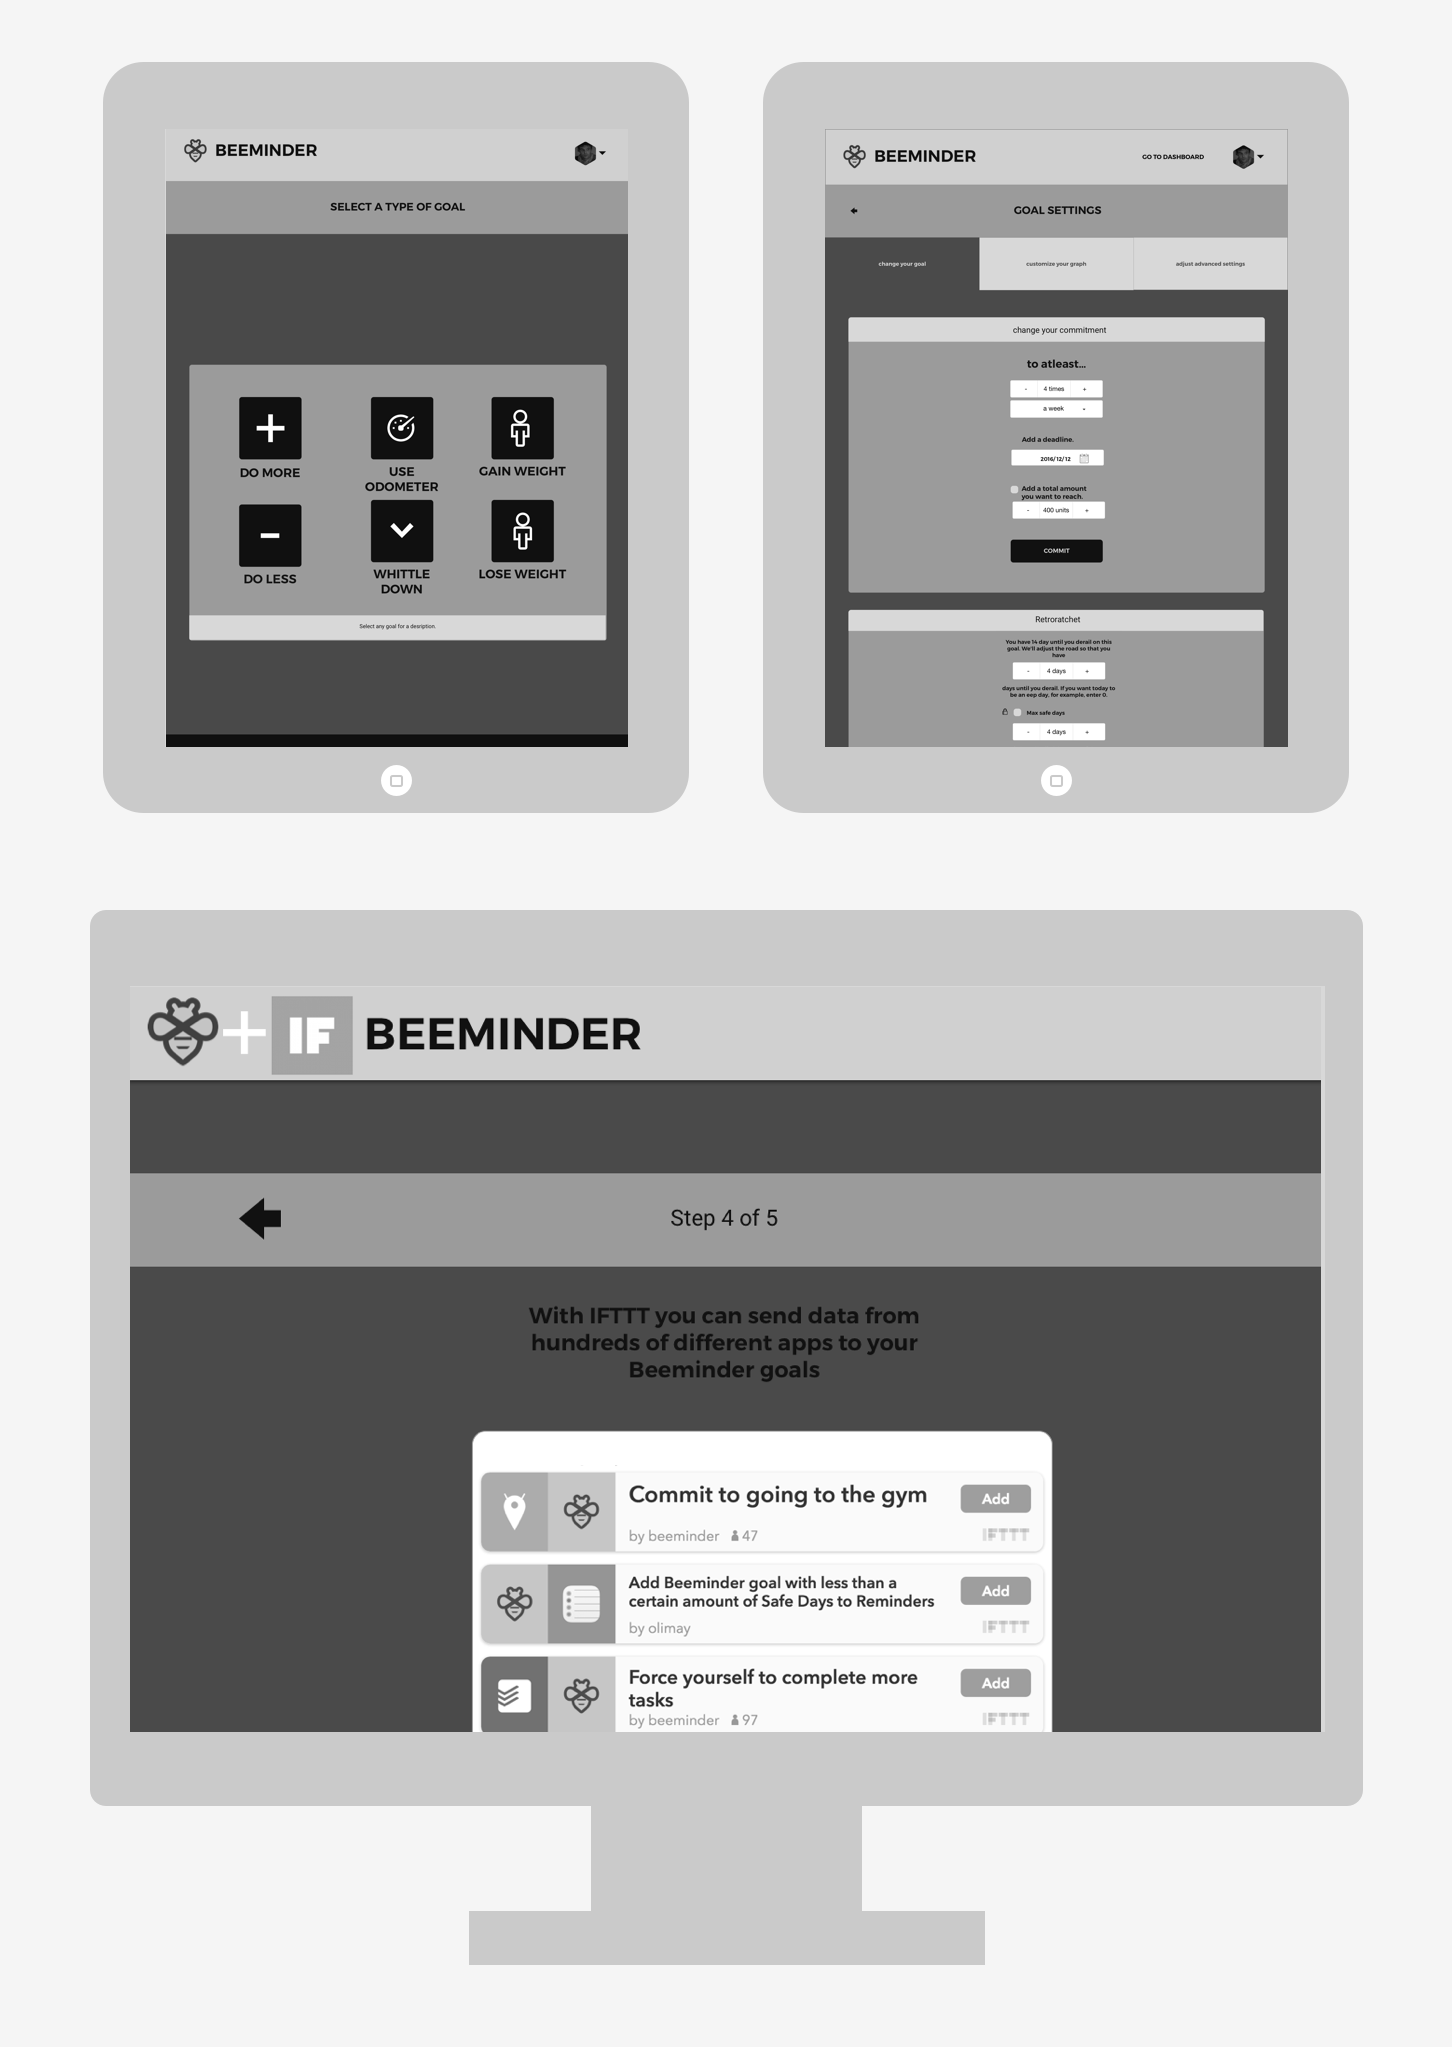 Wireframes for tablets